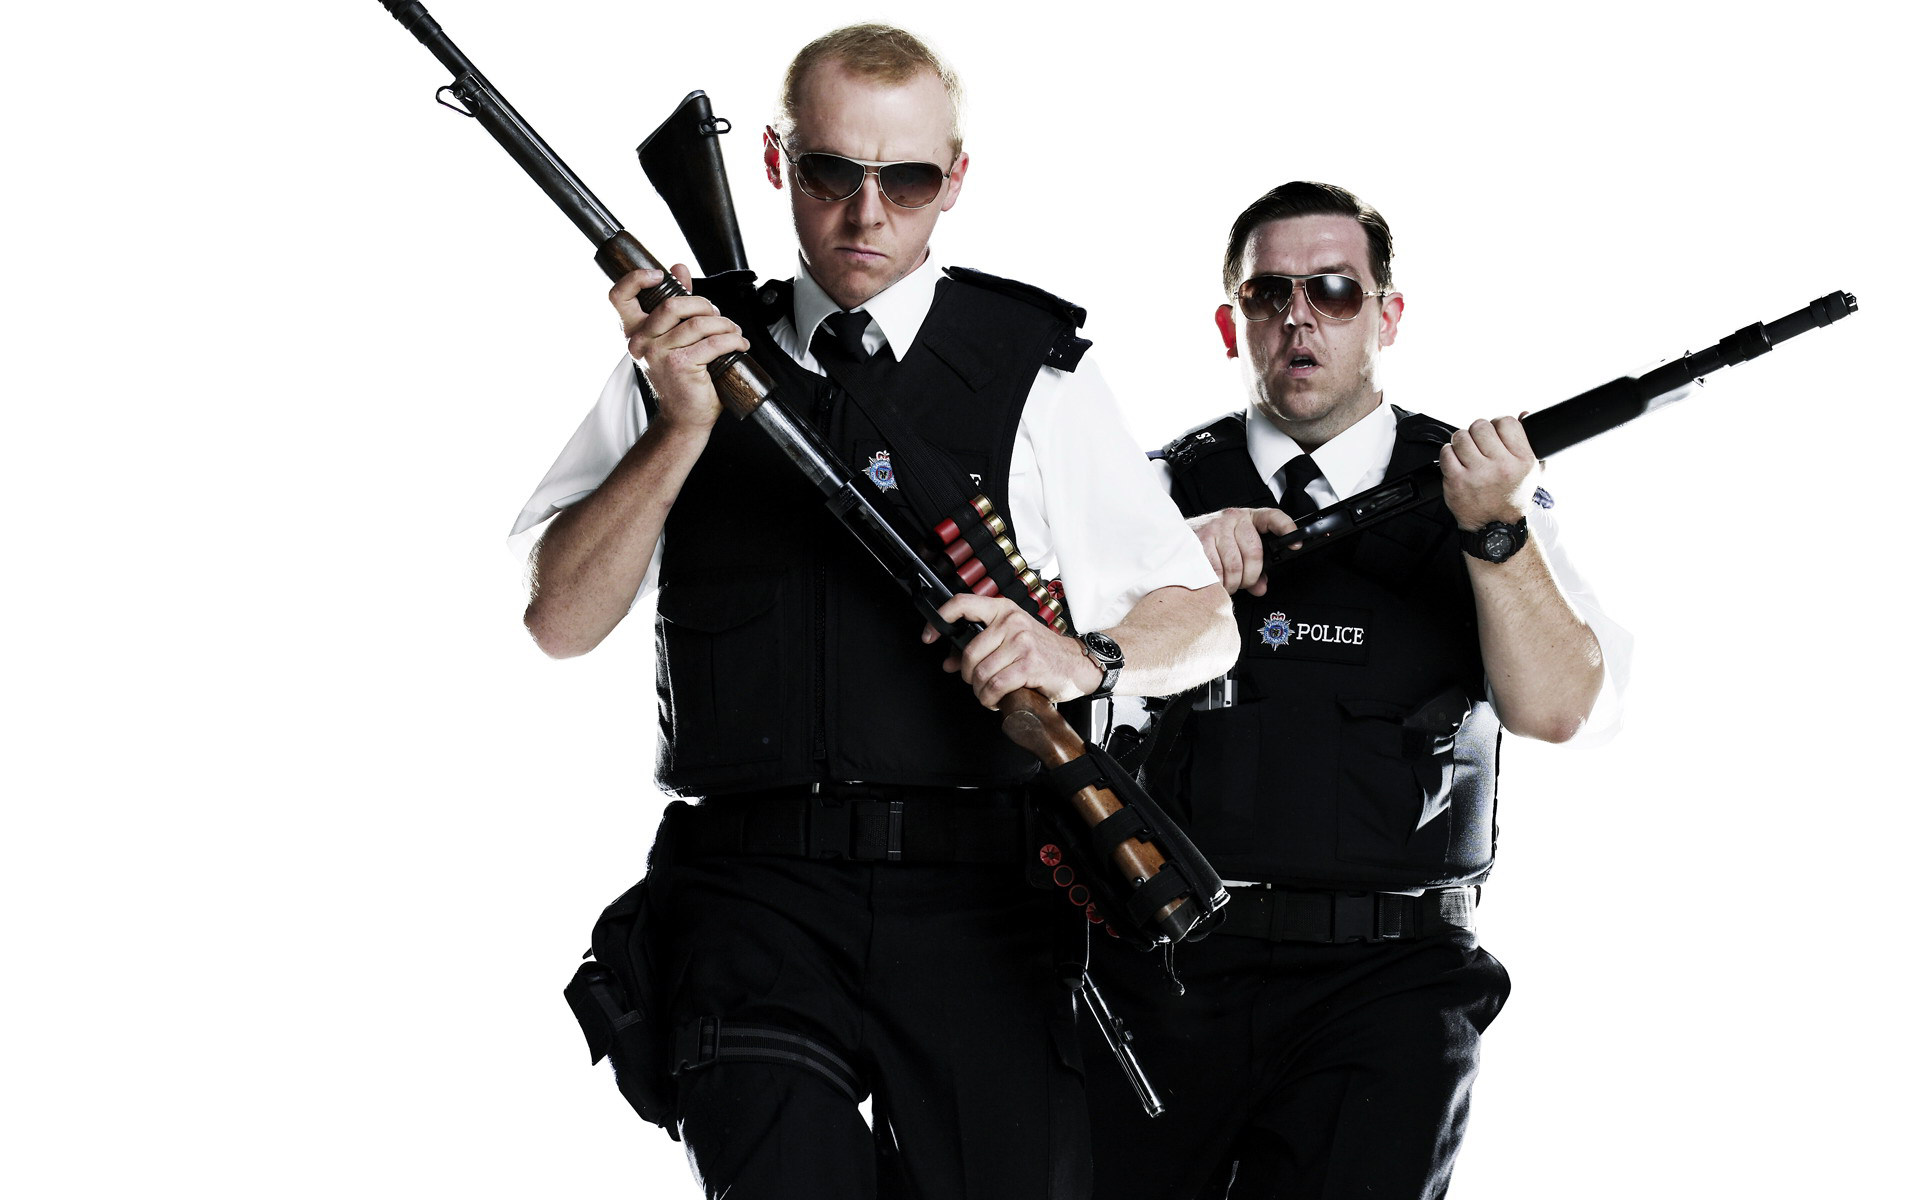 simon-pegg-simon-pegg-nick-frost-nick-frost-weapons-guns-police-hot-fuzz-hot-fuzz-police